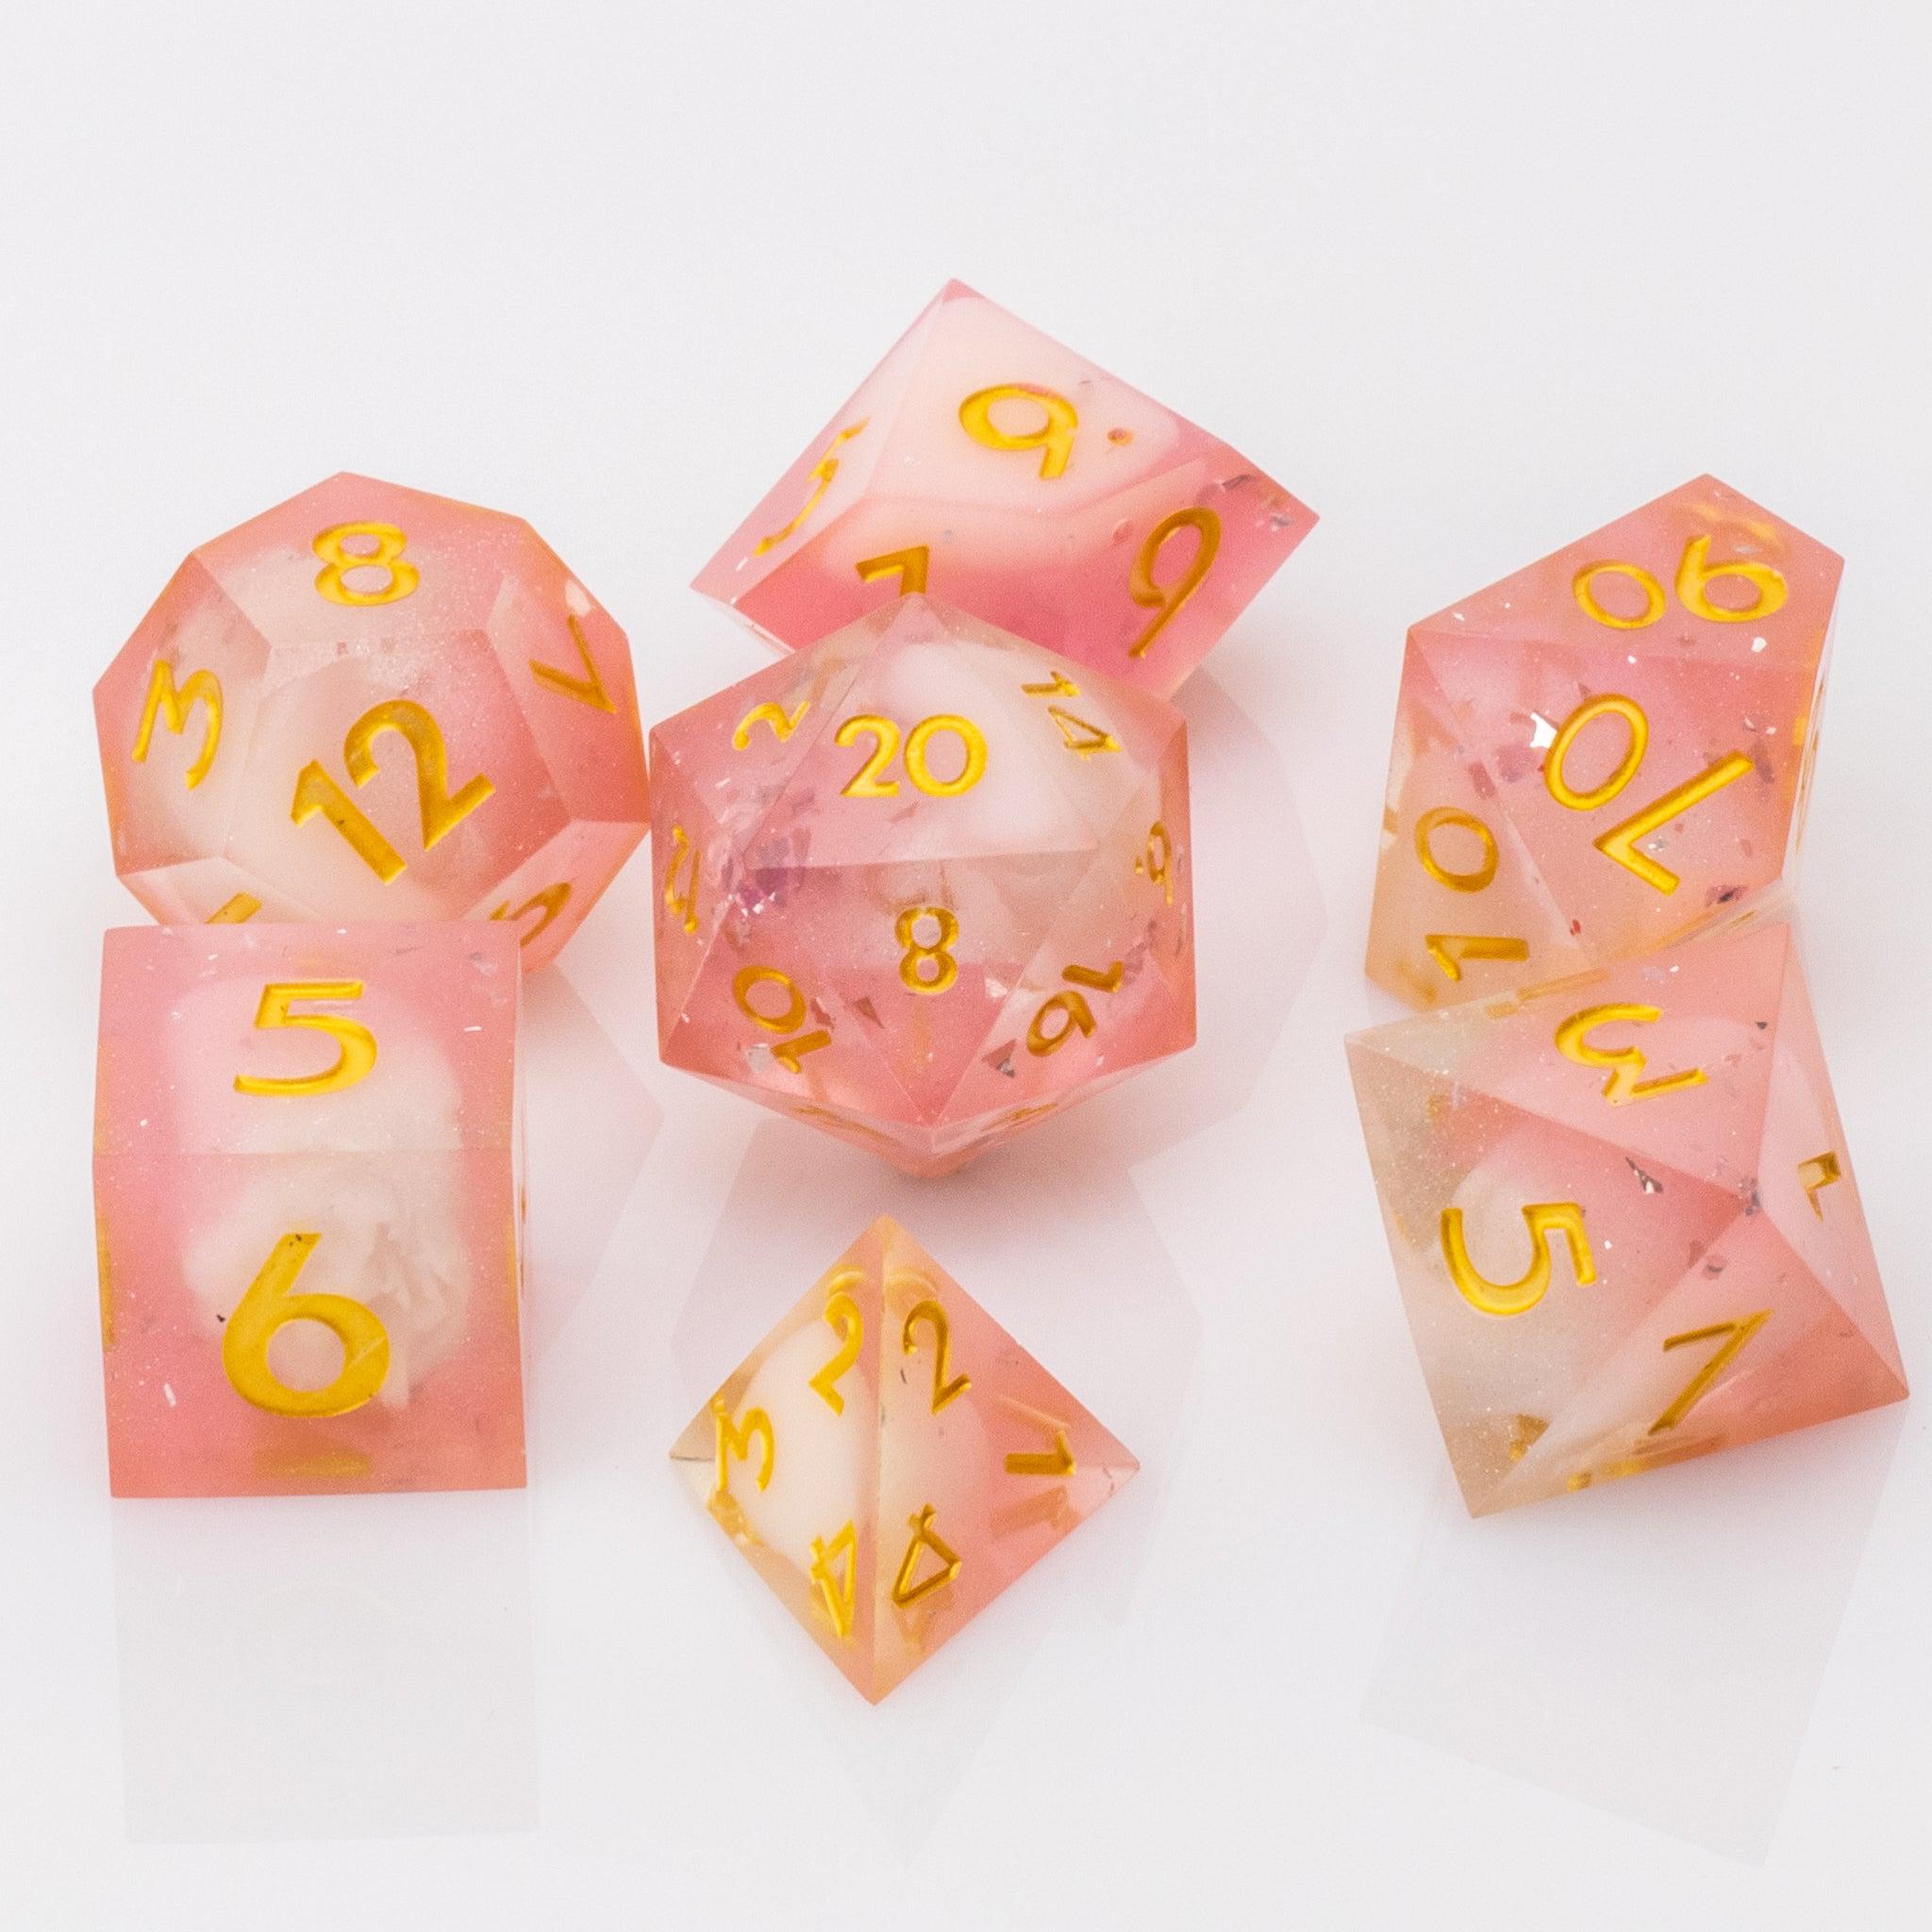 Lavendar Haze, pink and white handmade DND dice set on a white background.